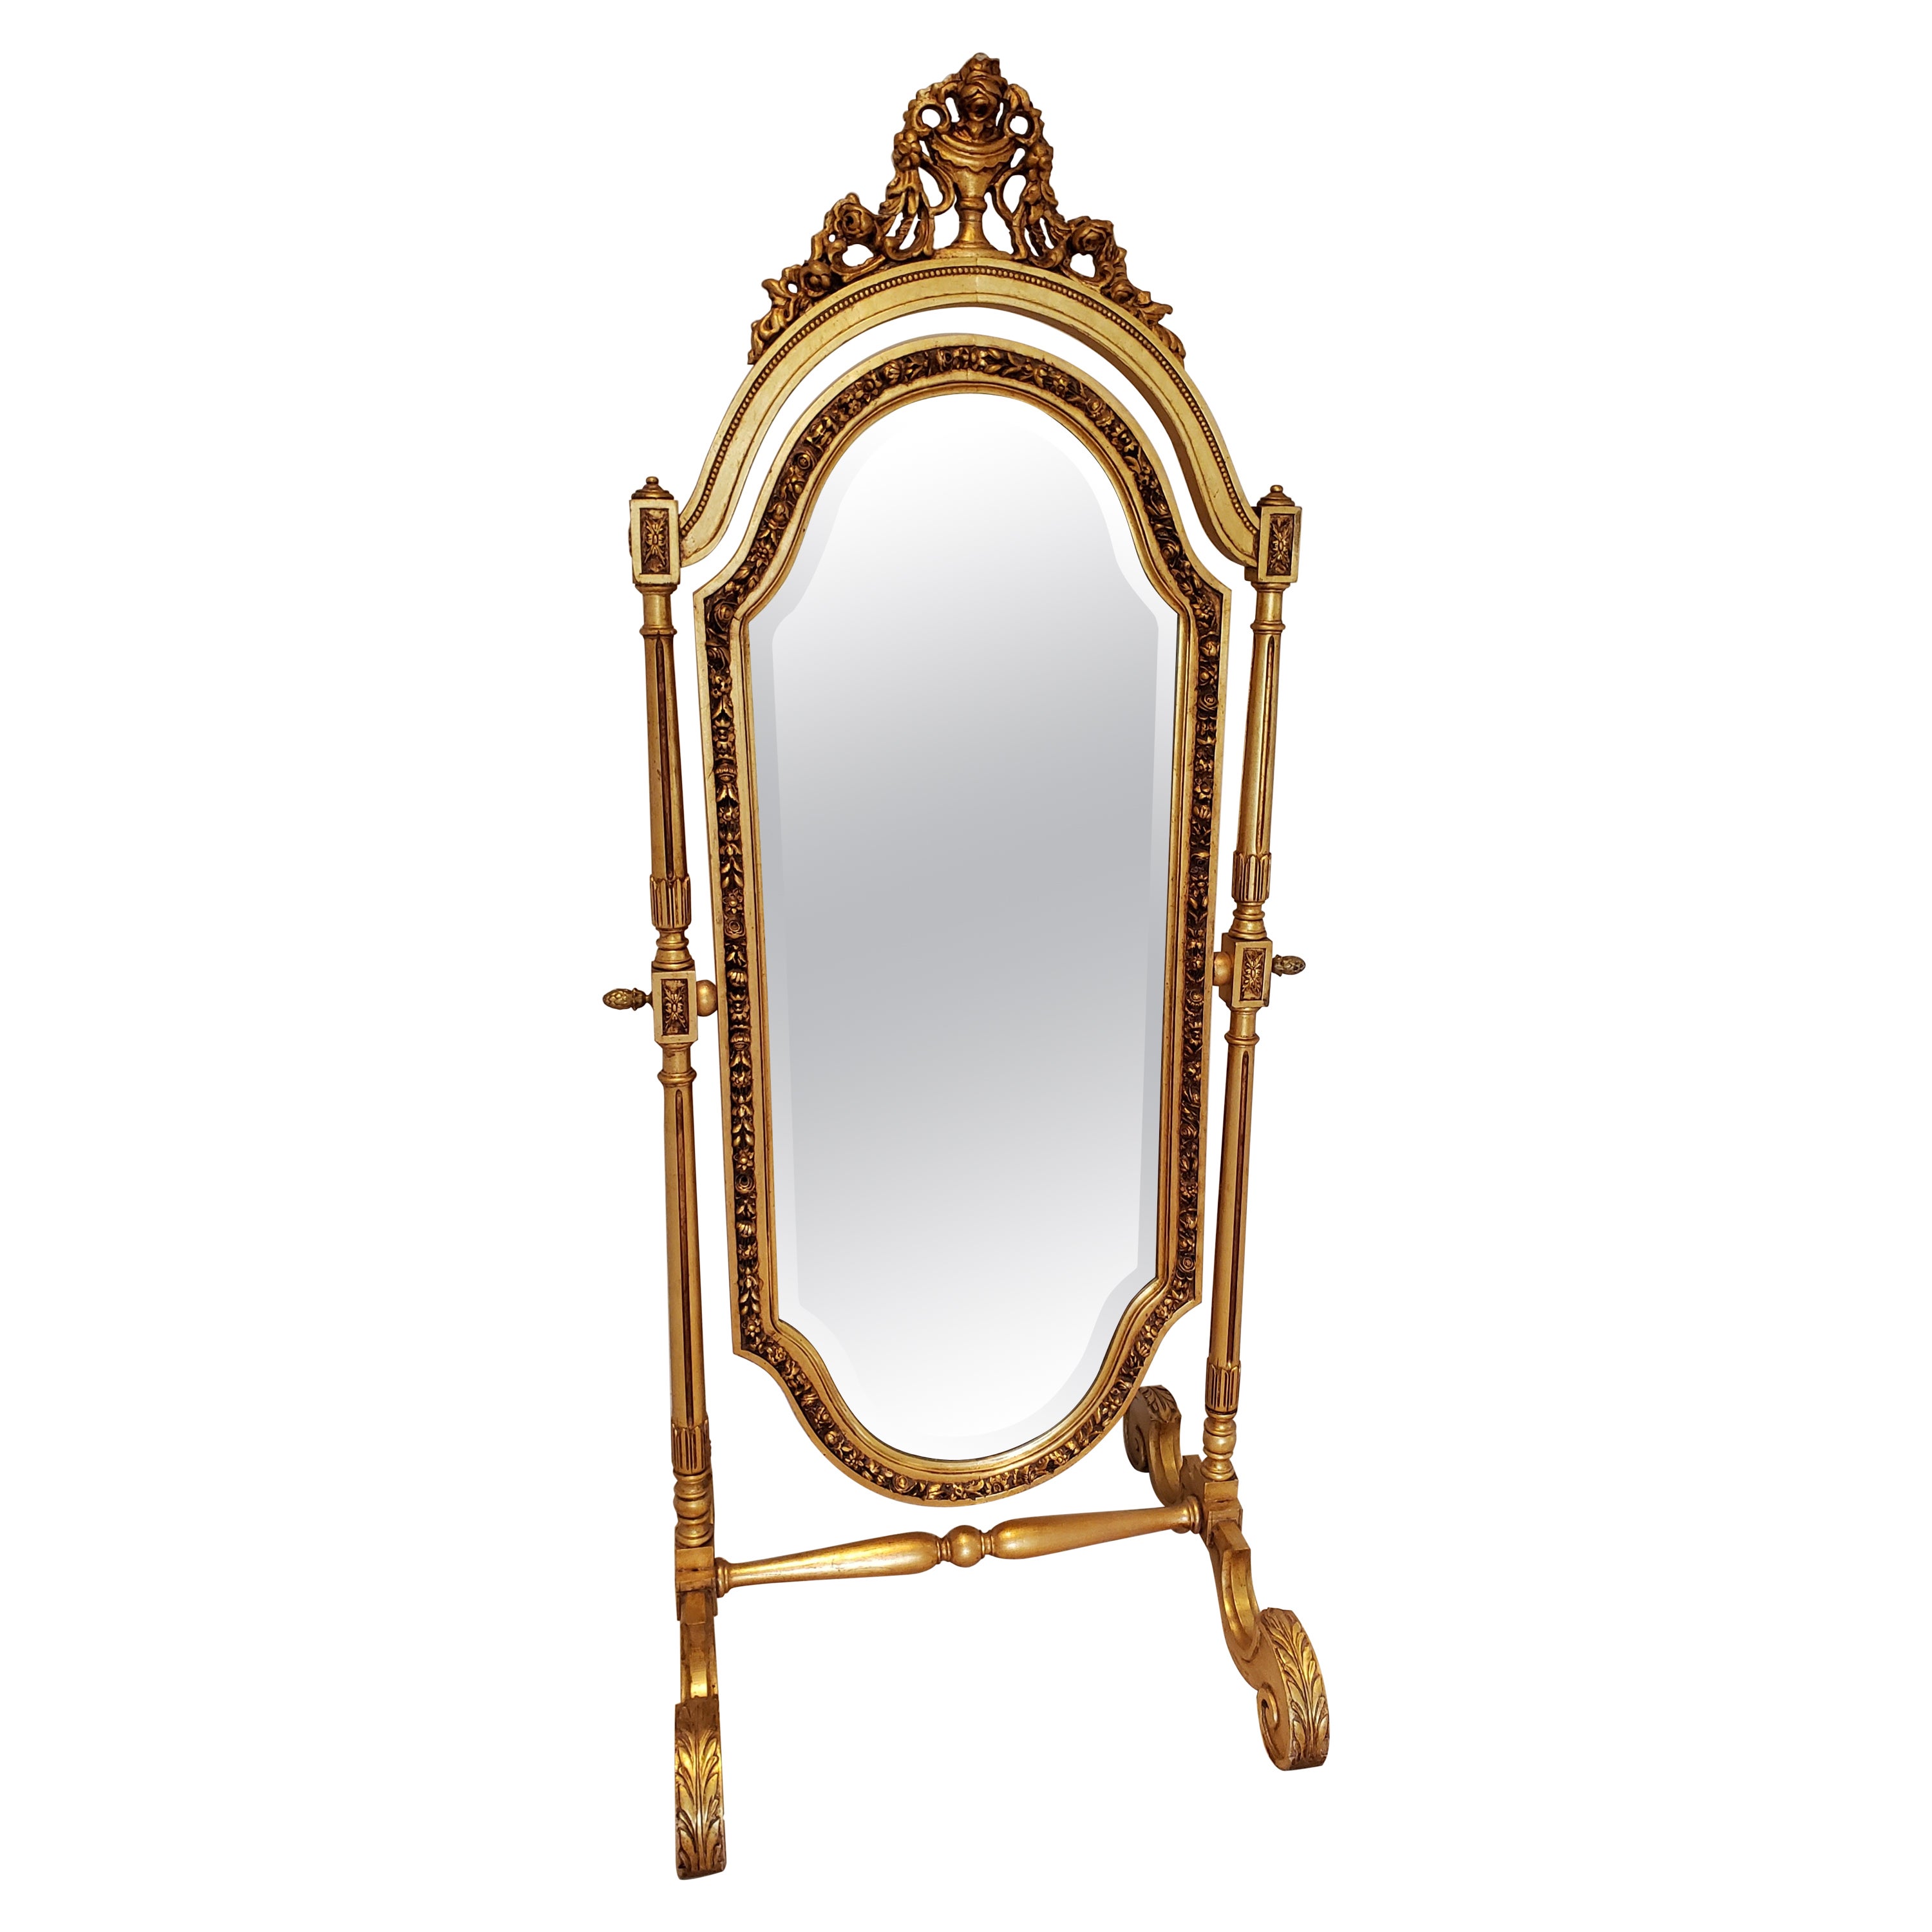 French 19th Century Louis XVI Style Full Length Giltwood Cheval Mirror